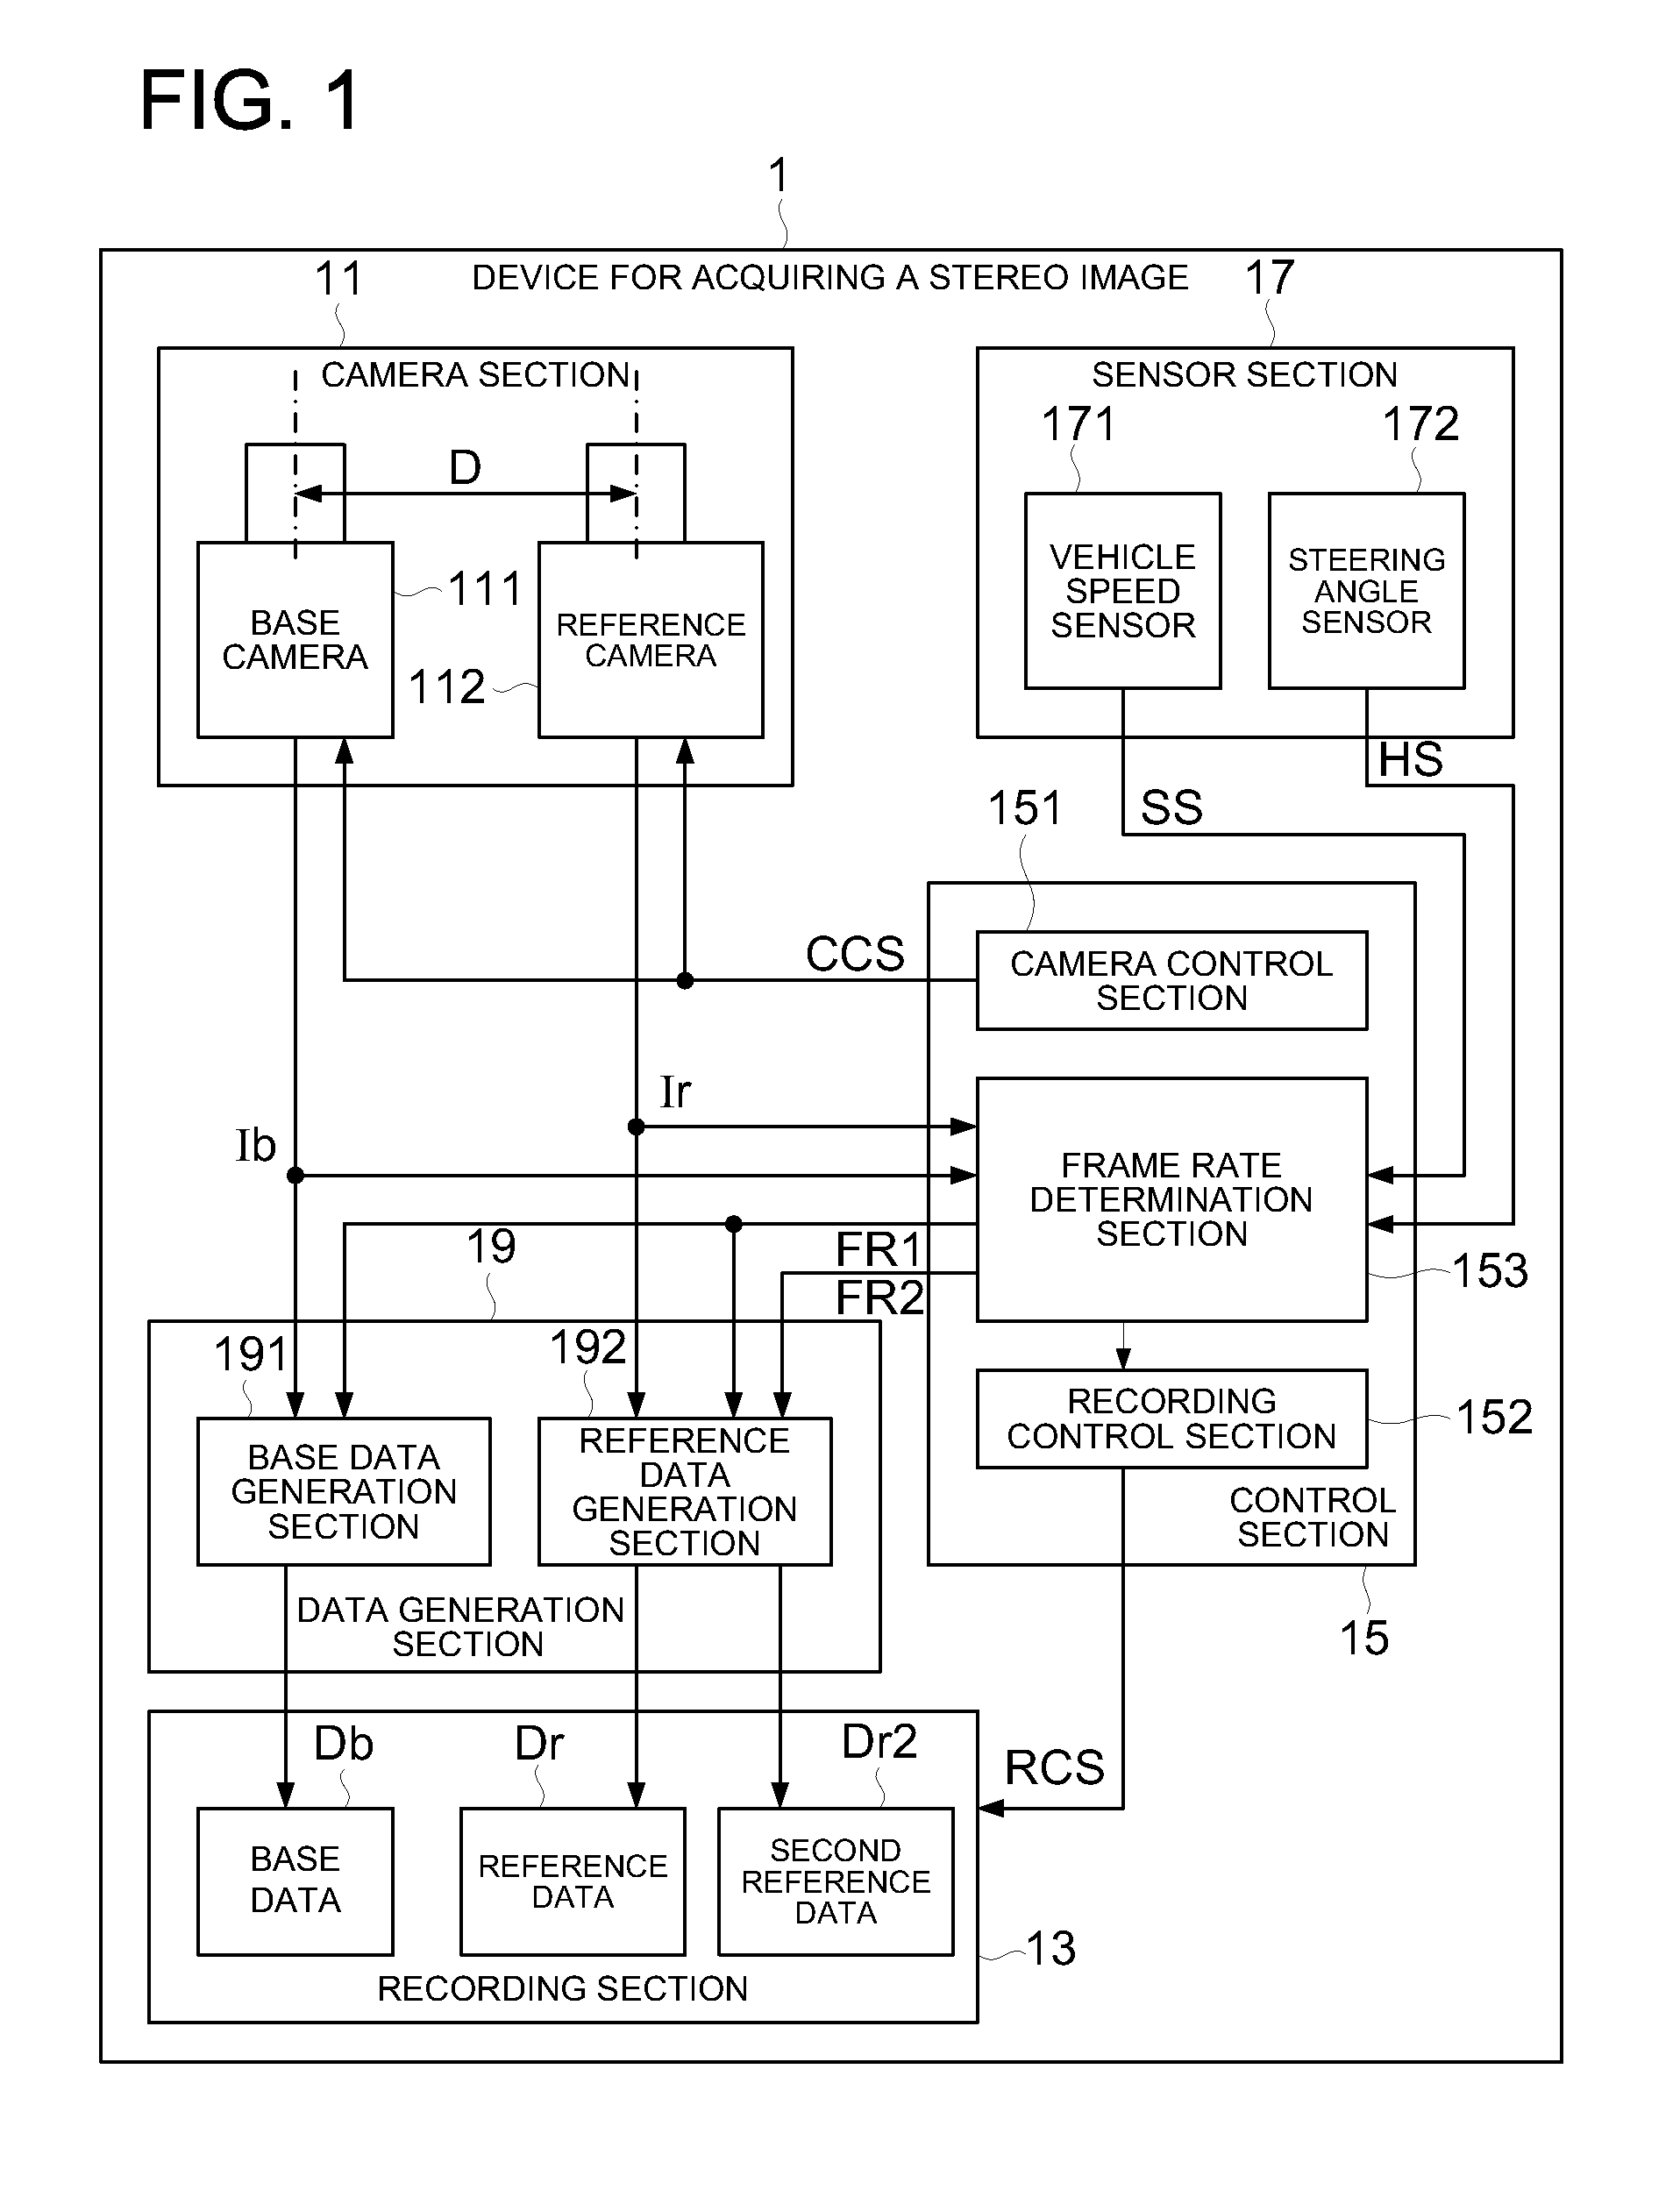 Device for acquiring stereo image